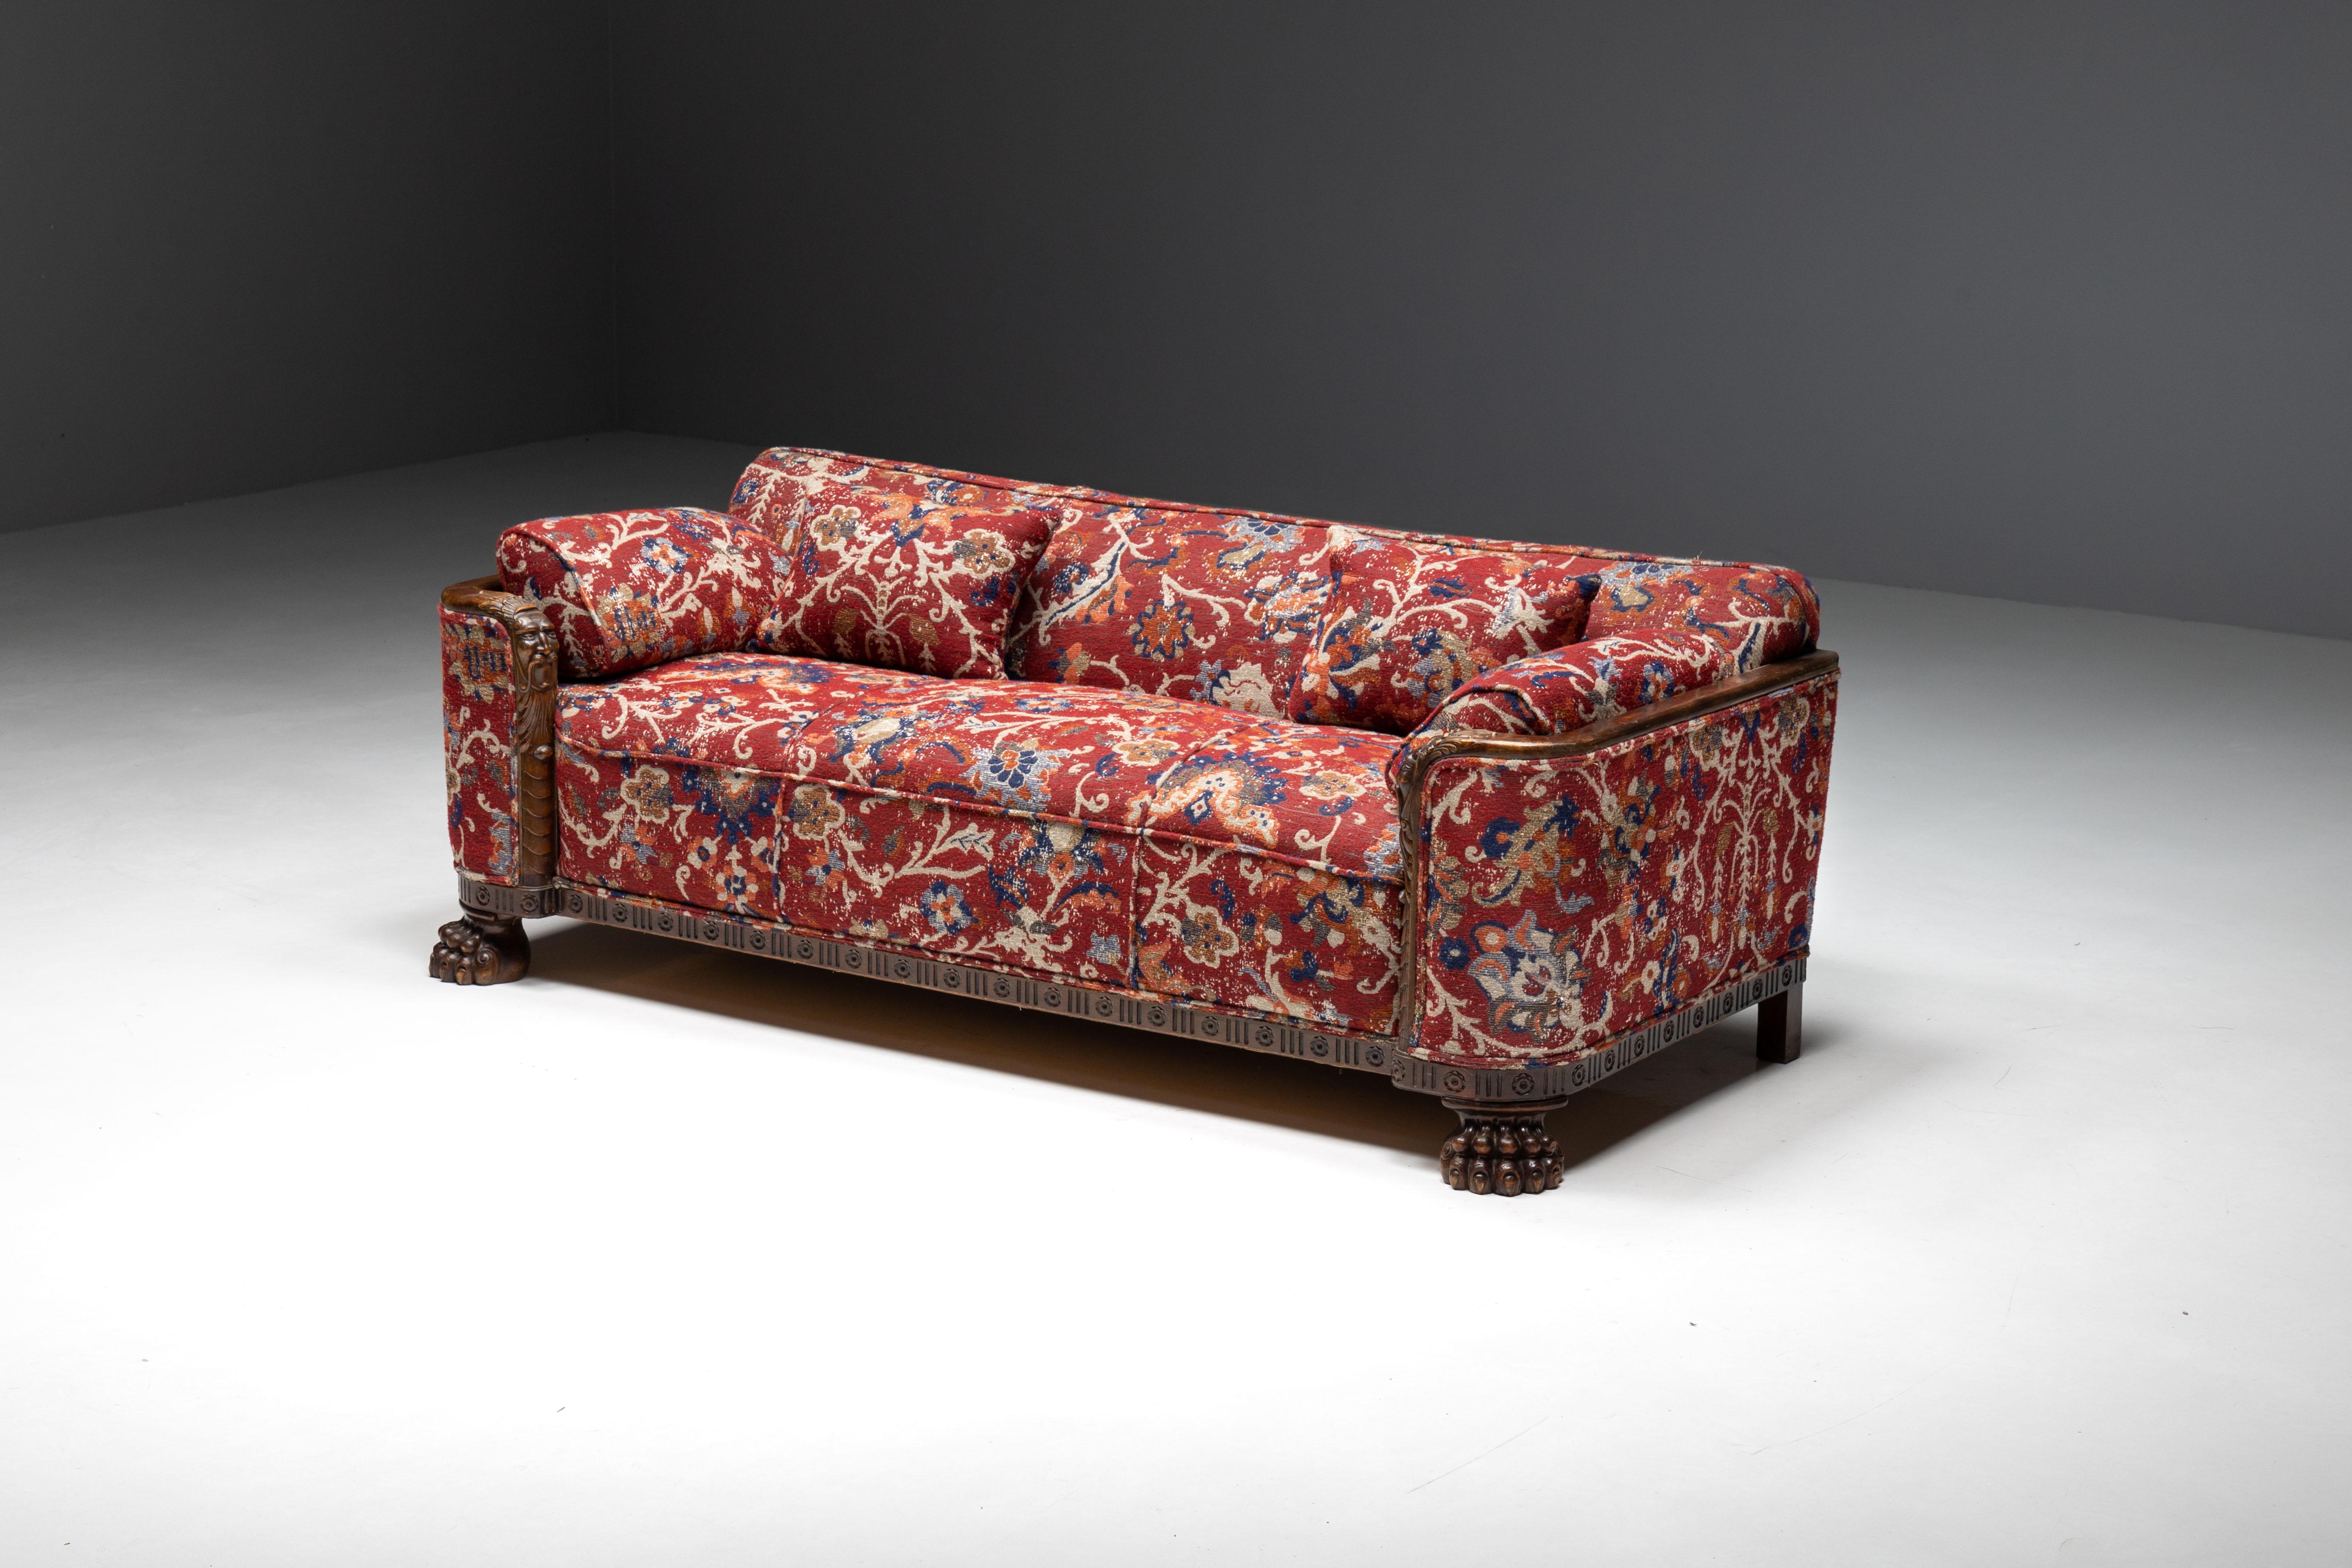 Chippendale style sofa adorned with oriental ornamentations, skilfully reupholstered in luxurious Pierre Frey fabric. This masterpiece harmoniously blends timeless design and contemporary elegance, showcasing a Persian rug reimagined in woolly